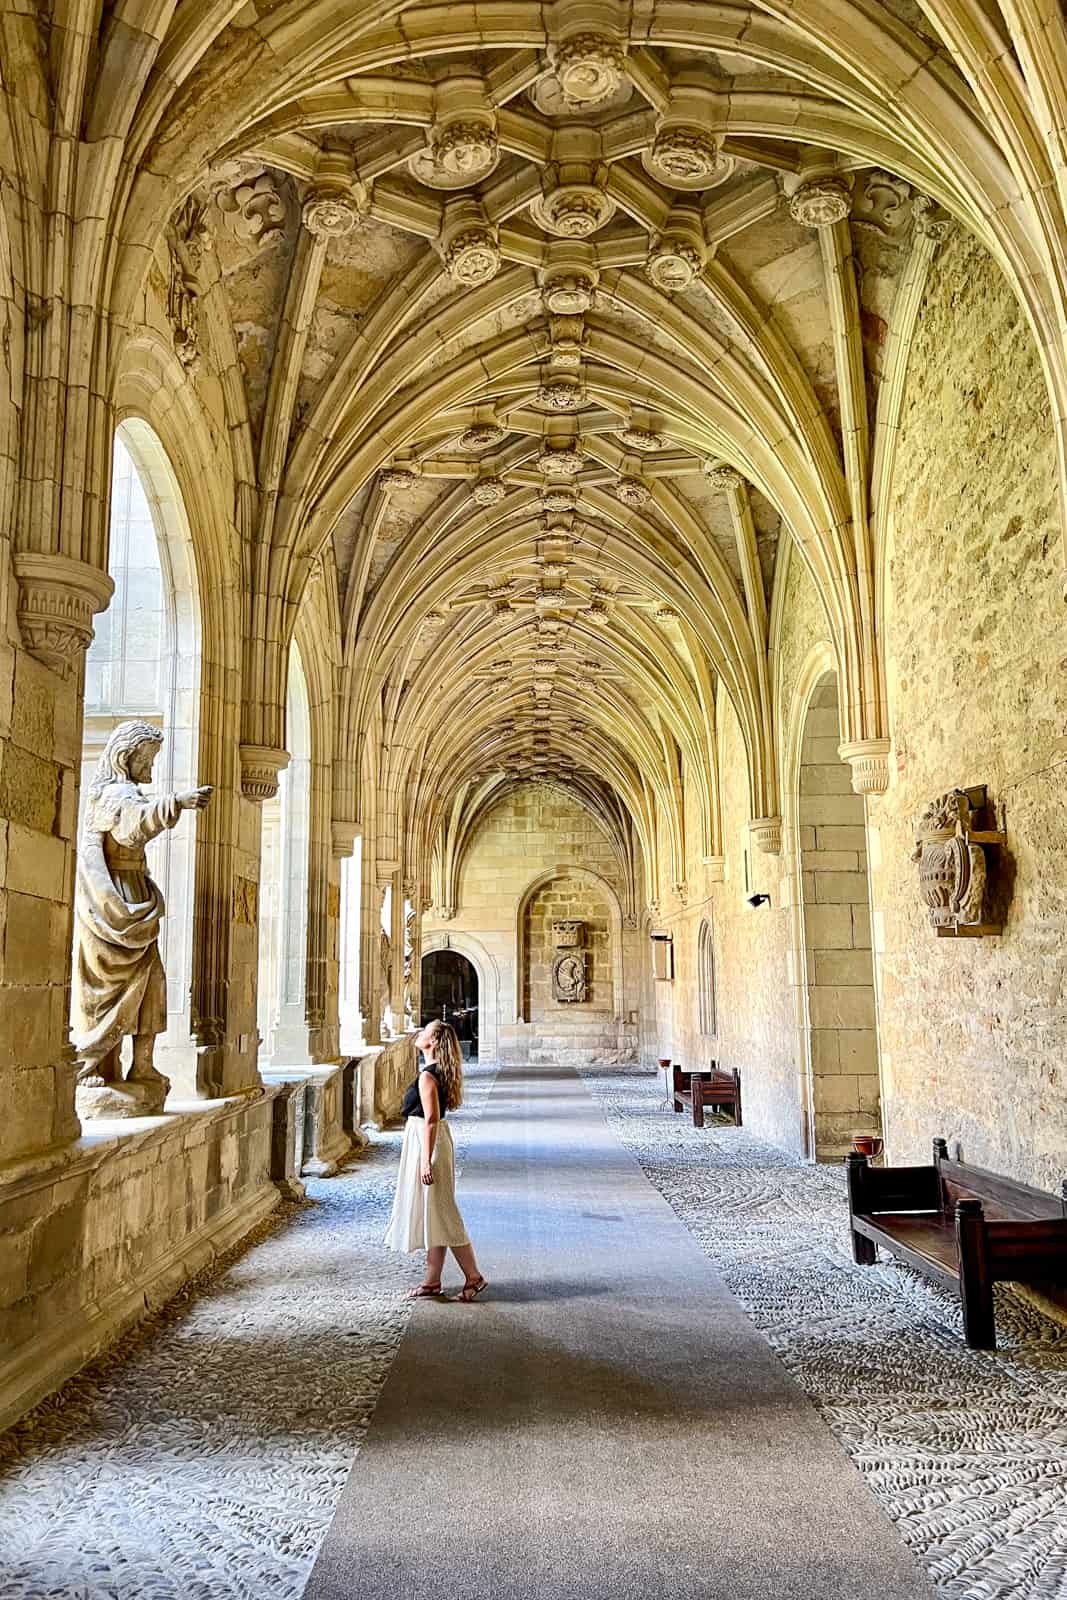 A woman in a black top and white skirt looks up to a stone statue of a man pointing inside the golden stone cloister of Hostel de San Marcos. 